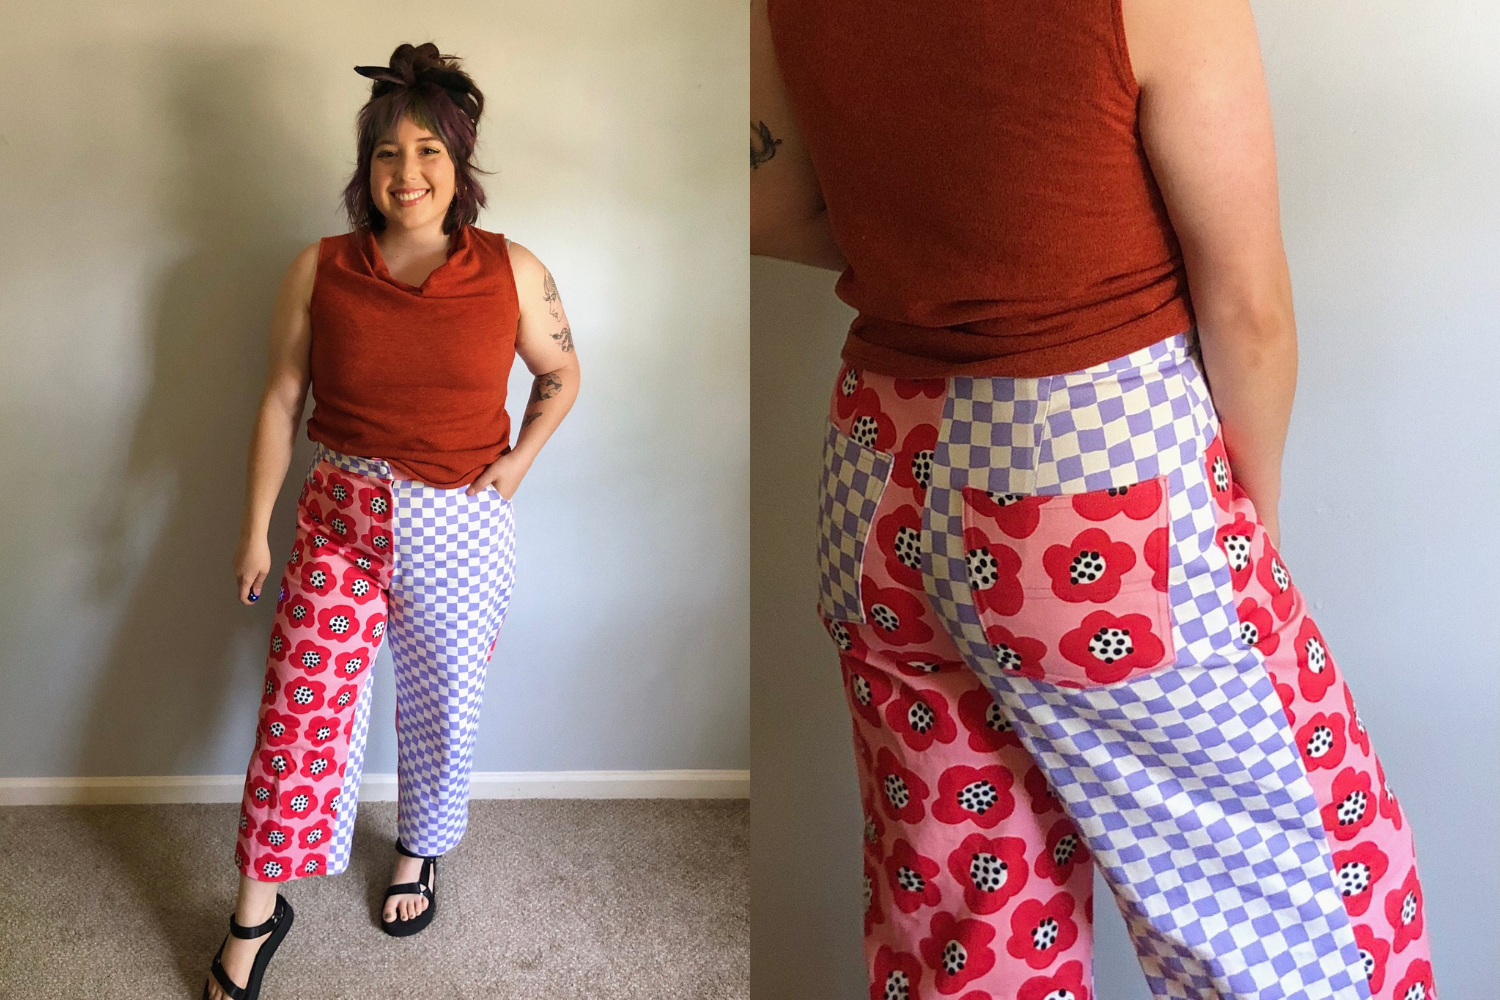 Wide-legged pants with checkered and floral patterns